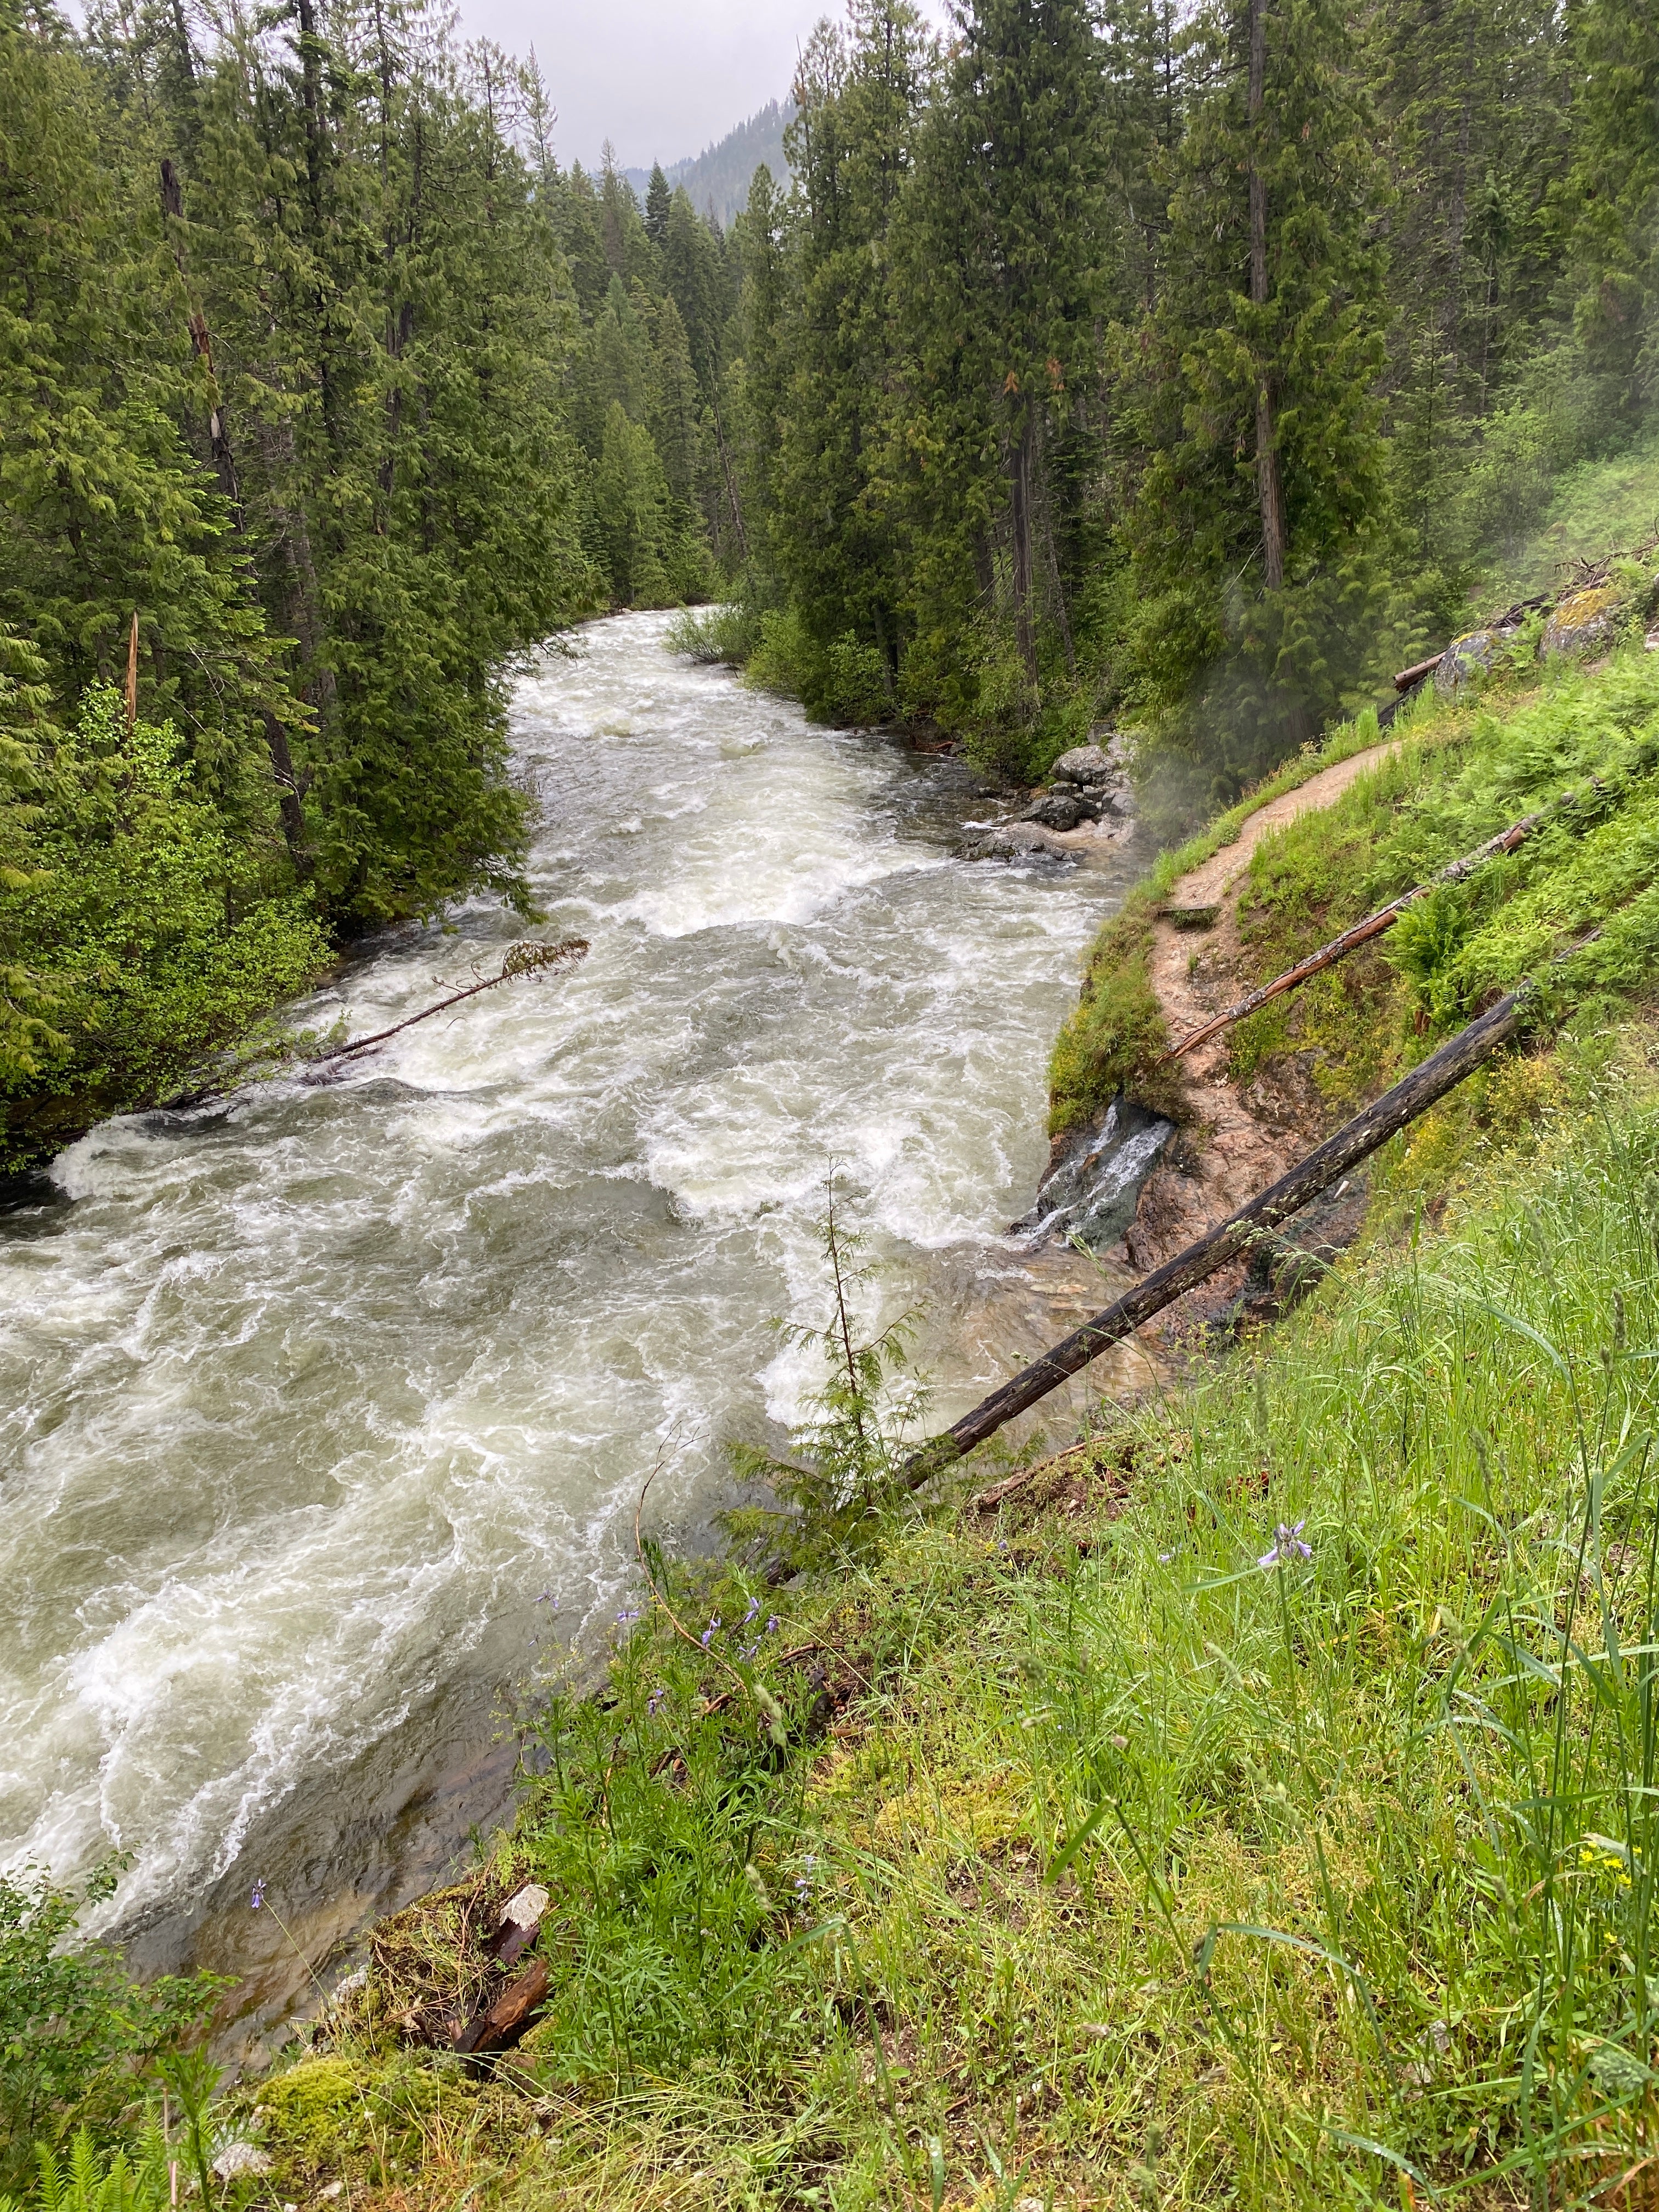 a grassy hillside slopes down to a massive stream rushing with whitewater. spruce trees and a misty horizon show in the background